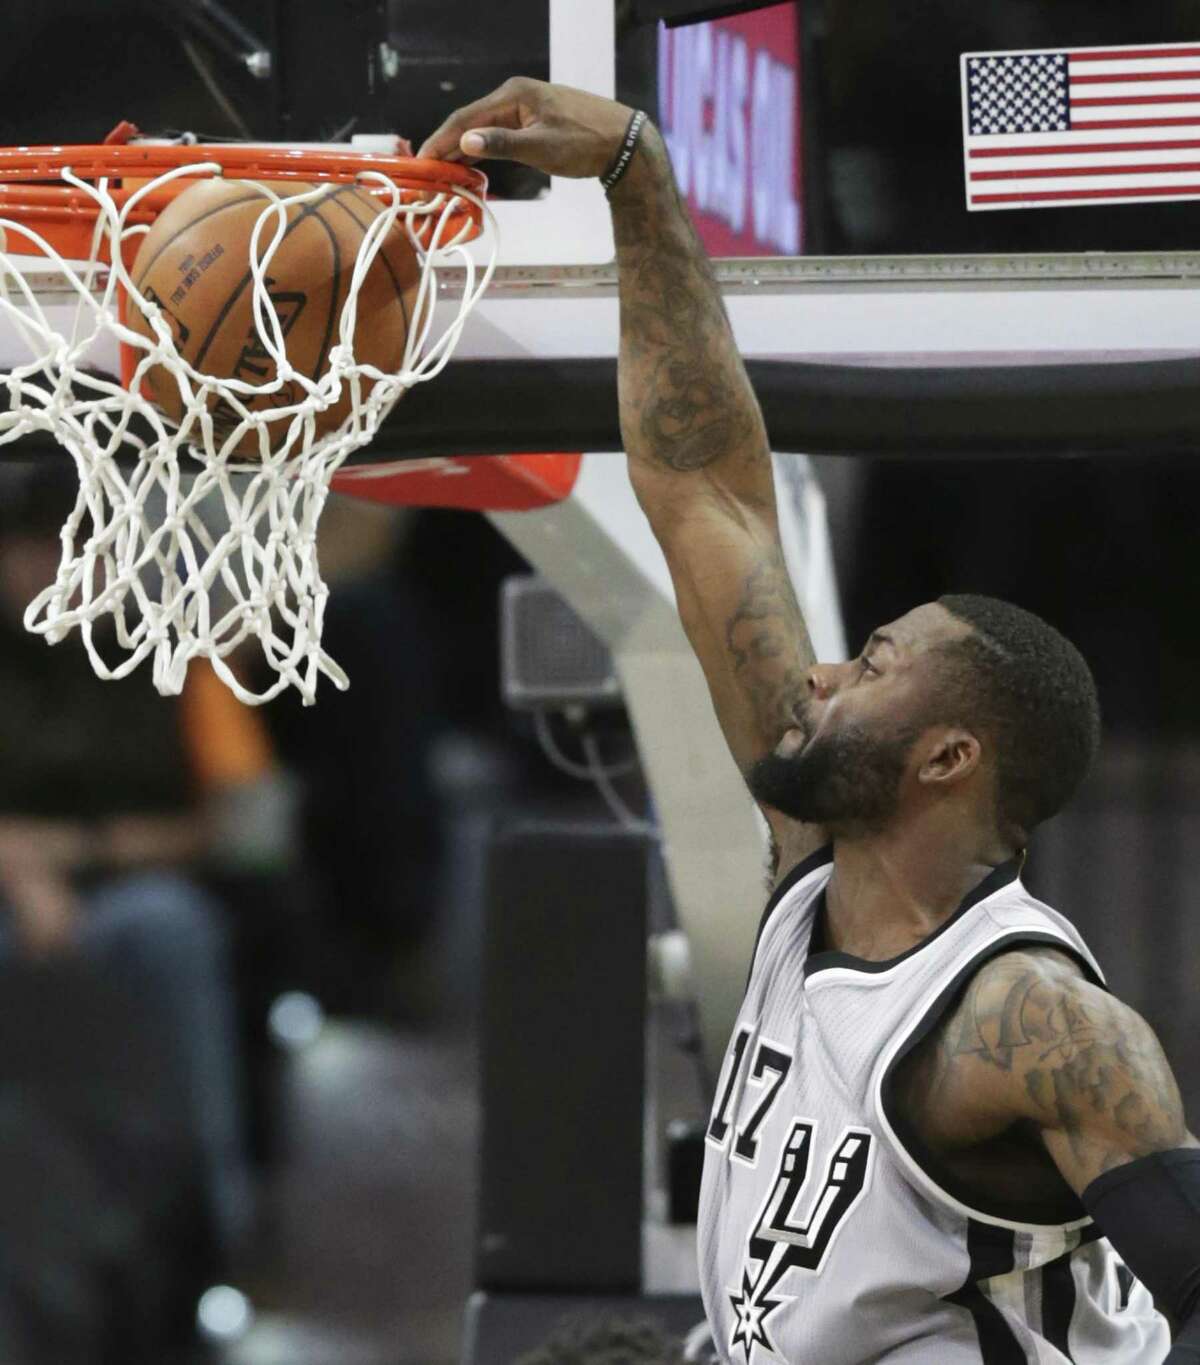 Jonathon Simmons slams one home in the second half as the Spurs host the Portland Trail Blazers at the AT&T Center on Dec. 30, 2016.